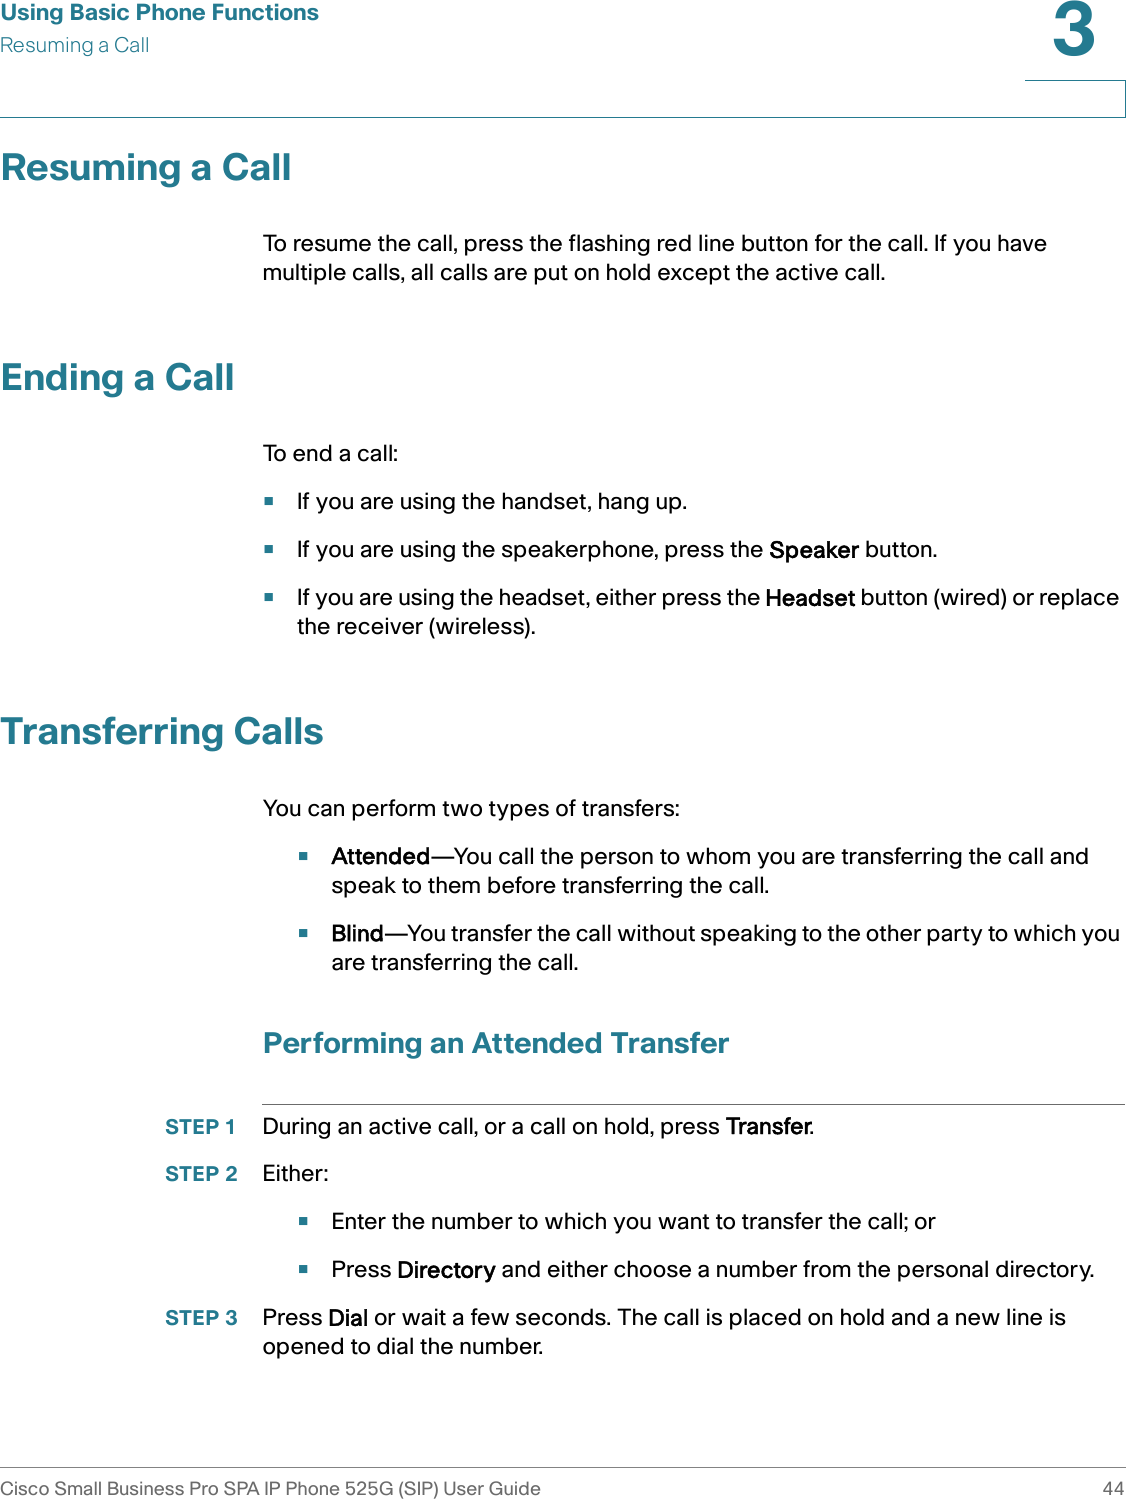 Using Basic Phone FunctionsResuming a CallCisco Small Business Pro SPA IP Phone 525G (SIP) User Guide 443 Resuming a CallTo resume the call, press the flashing red line button for the call. If you have multiple calls, all calls are put on hold except the active call.Ending a CallTo end a call:•If you are using the handset, hang up.•If you are using the speakerphone, press the Speaker button.•If you are using the headset, either press the Headset button (wired) or replace the receiver (wireless).Transferring CallsYou can perform two types of transfers:•Attended—You call the person to whom you are transferring the call and speak to them before transferring the call.•Blind—You transfer the call without speaking to the other party to which you are transferring the call.Performing an Attended TransferSTEP 1 During an active call, or a call on hold, press Transfer. STEP 2 Either:•Enter the number to which you want to transfer the call; or•Press Directory and either choose a number from the personal directory.STEP 3 Press Dial or wait a few seconds. The call is placed on hold and a new line is opened to dial the number.